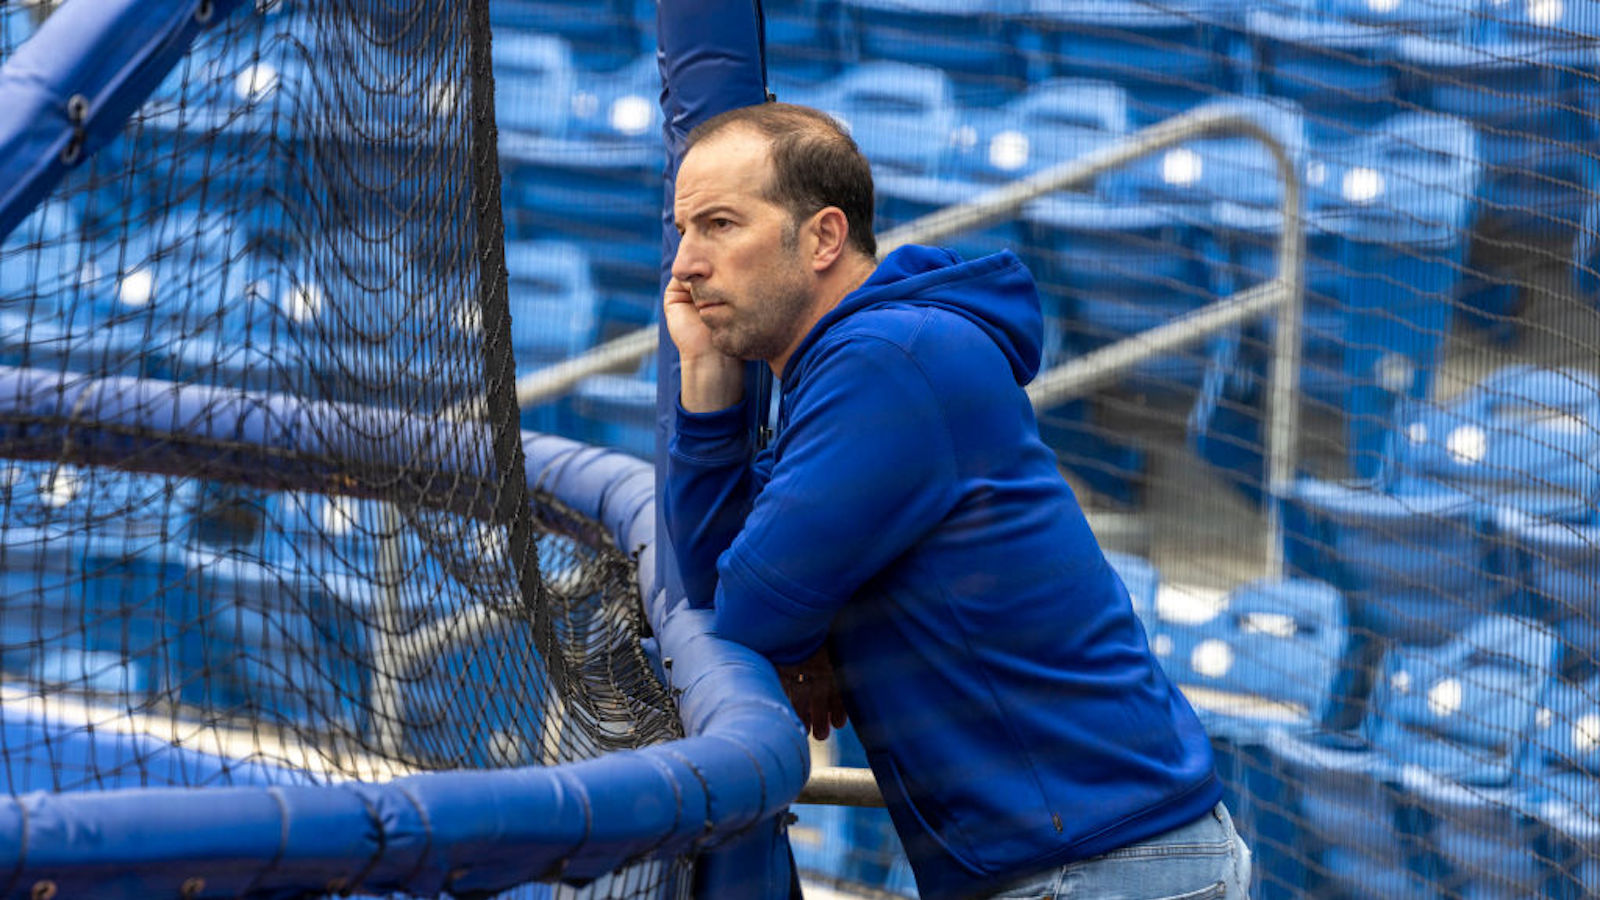 New York Mets general manager Billy Eppler during a spring training workout on Feb. 18, 2023 in Port St. Lucie, Florida.